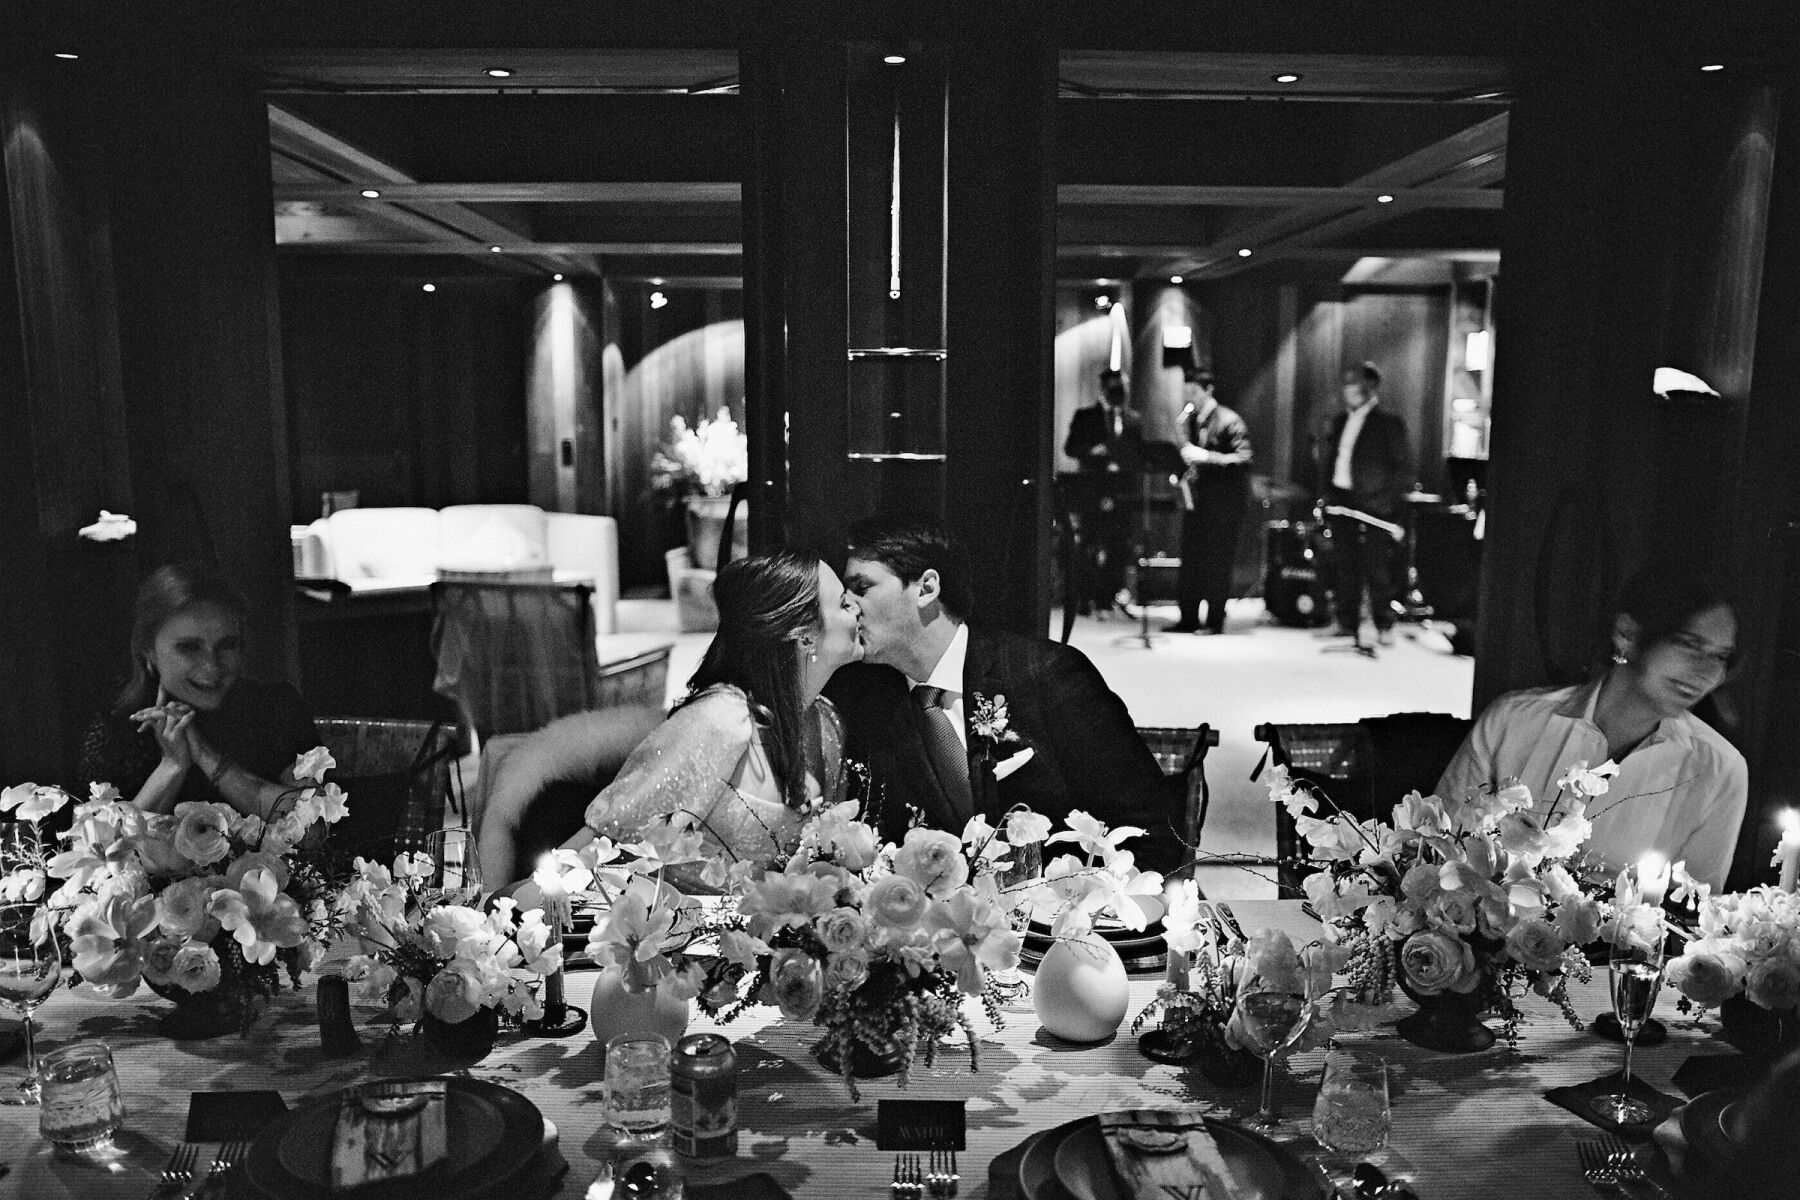 Winter wedding details: A bride and groom share a kiss during their wedding dinner as musicians play in the background.